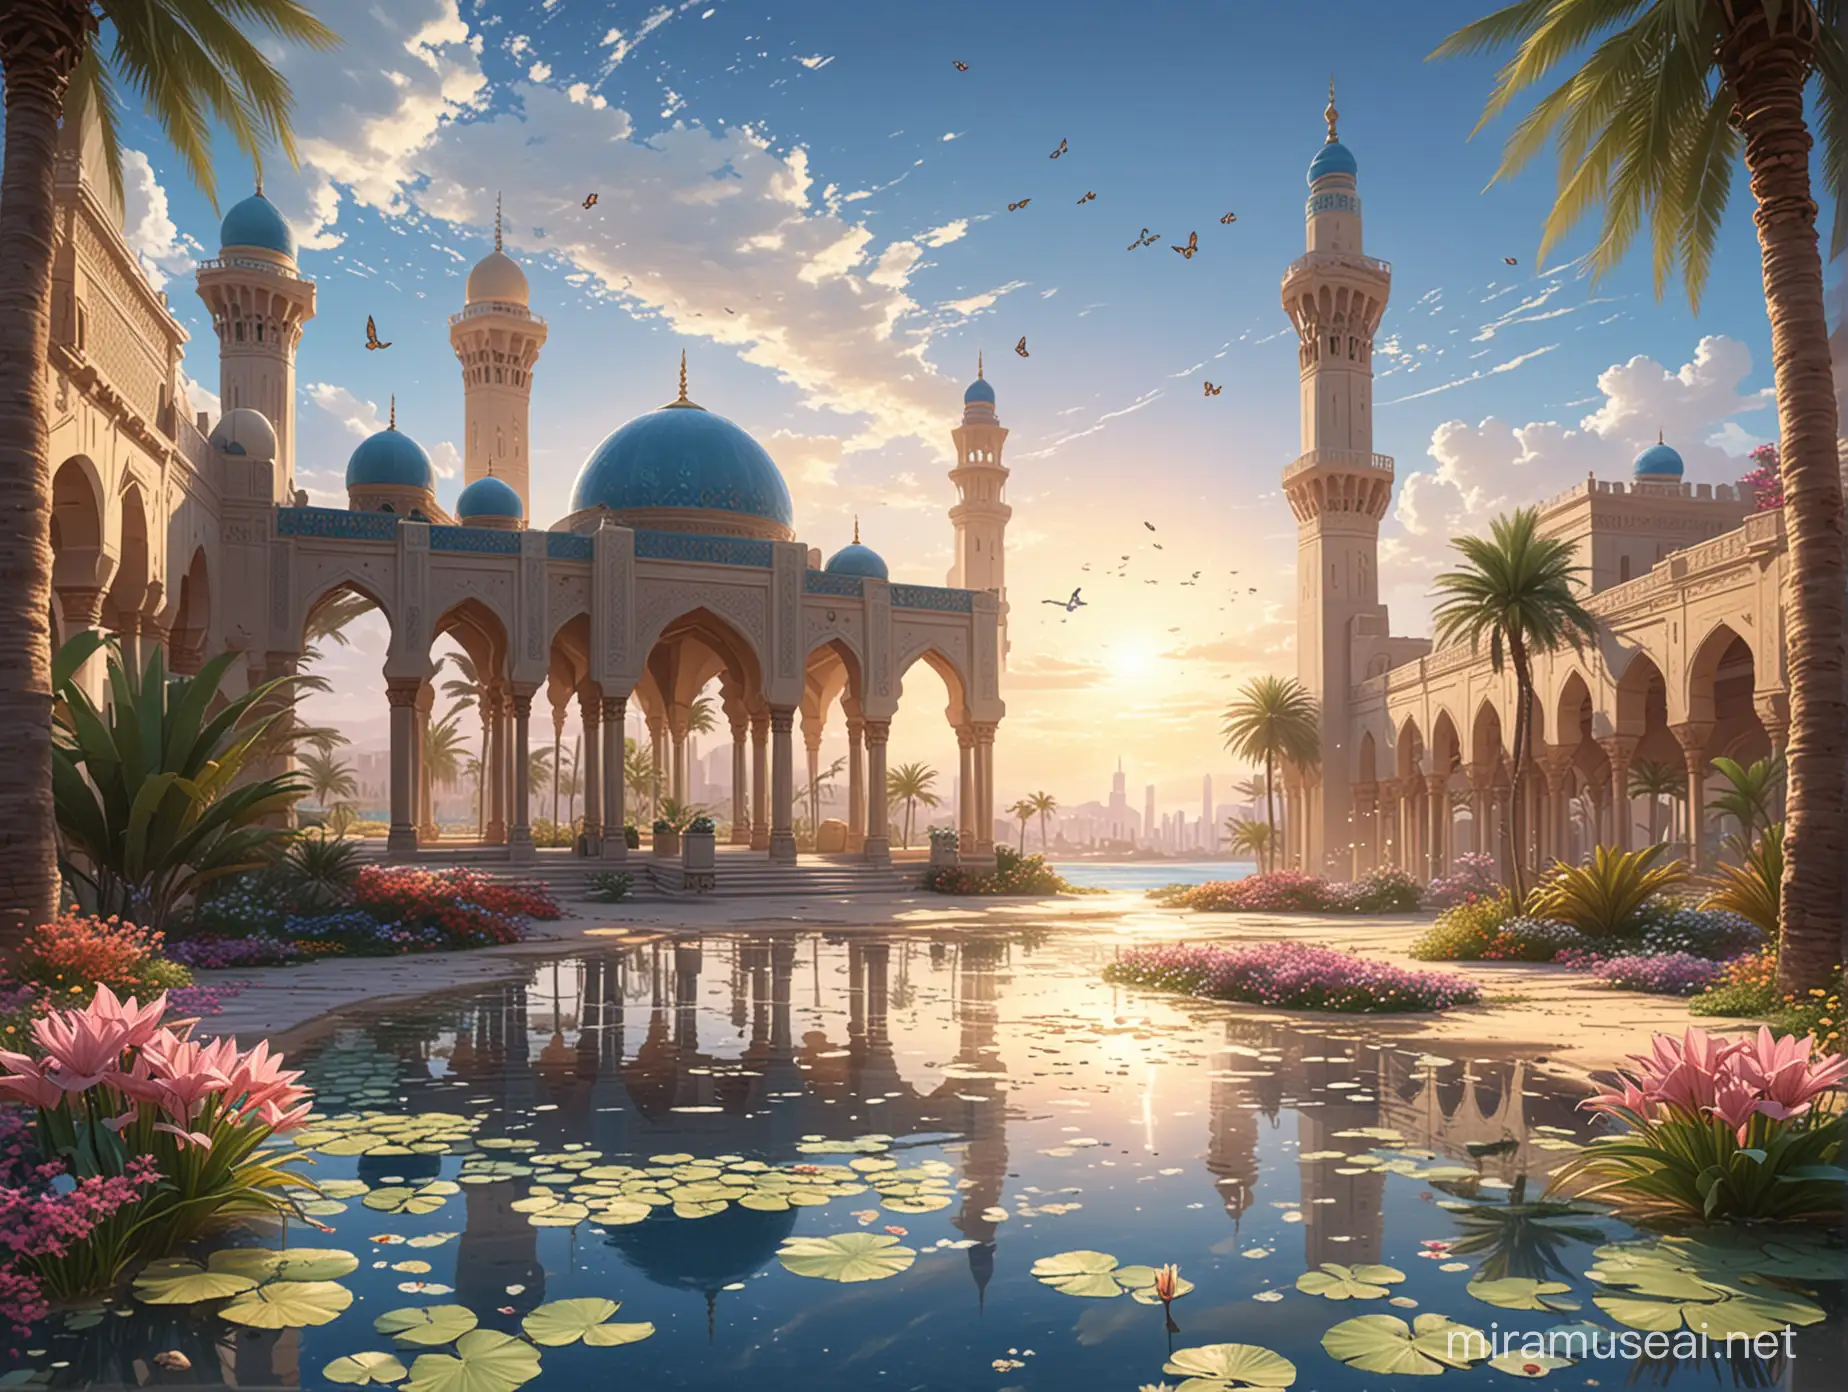 Fantasy Arabian Oasis with Vibrant Colors and Anime Style